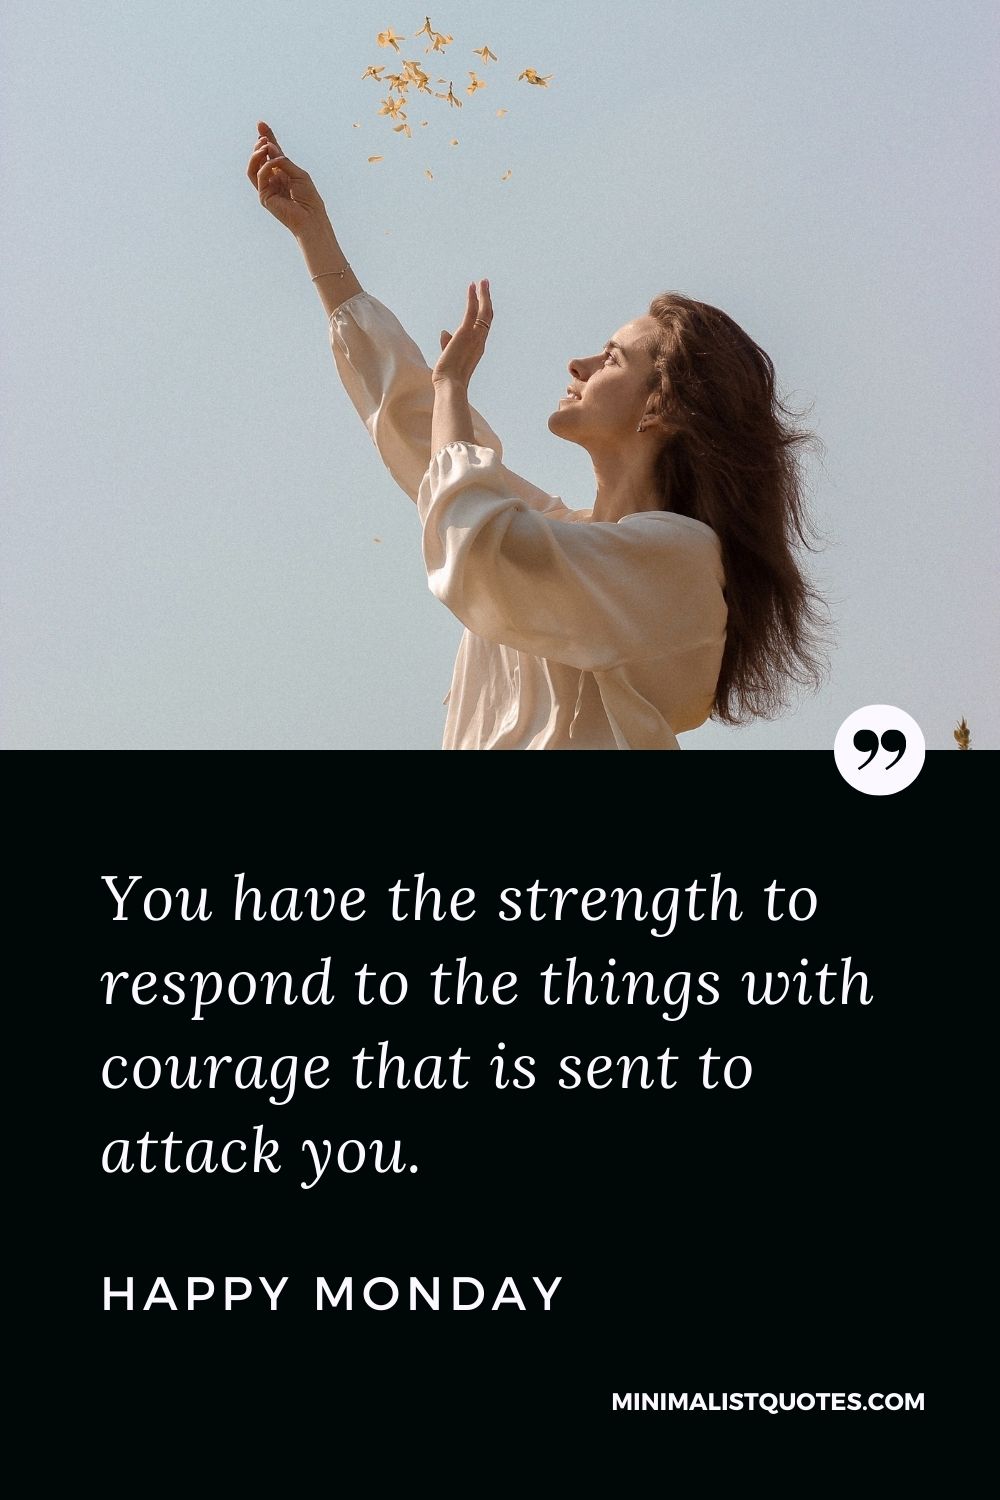 Monday Motivation quote & message with image: You have the strength to respond to the things with courage that is sent to attack you. Happy Monday!